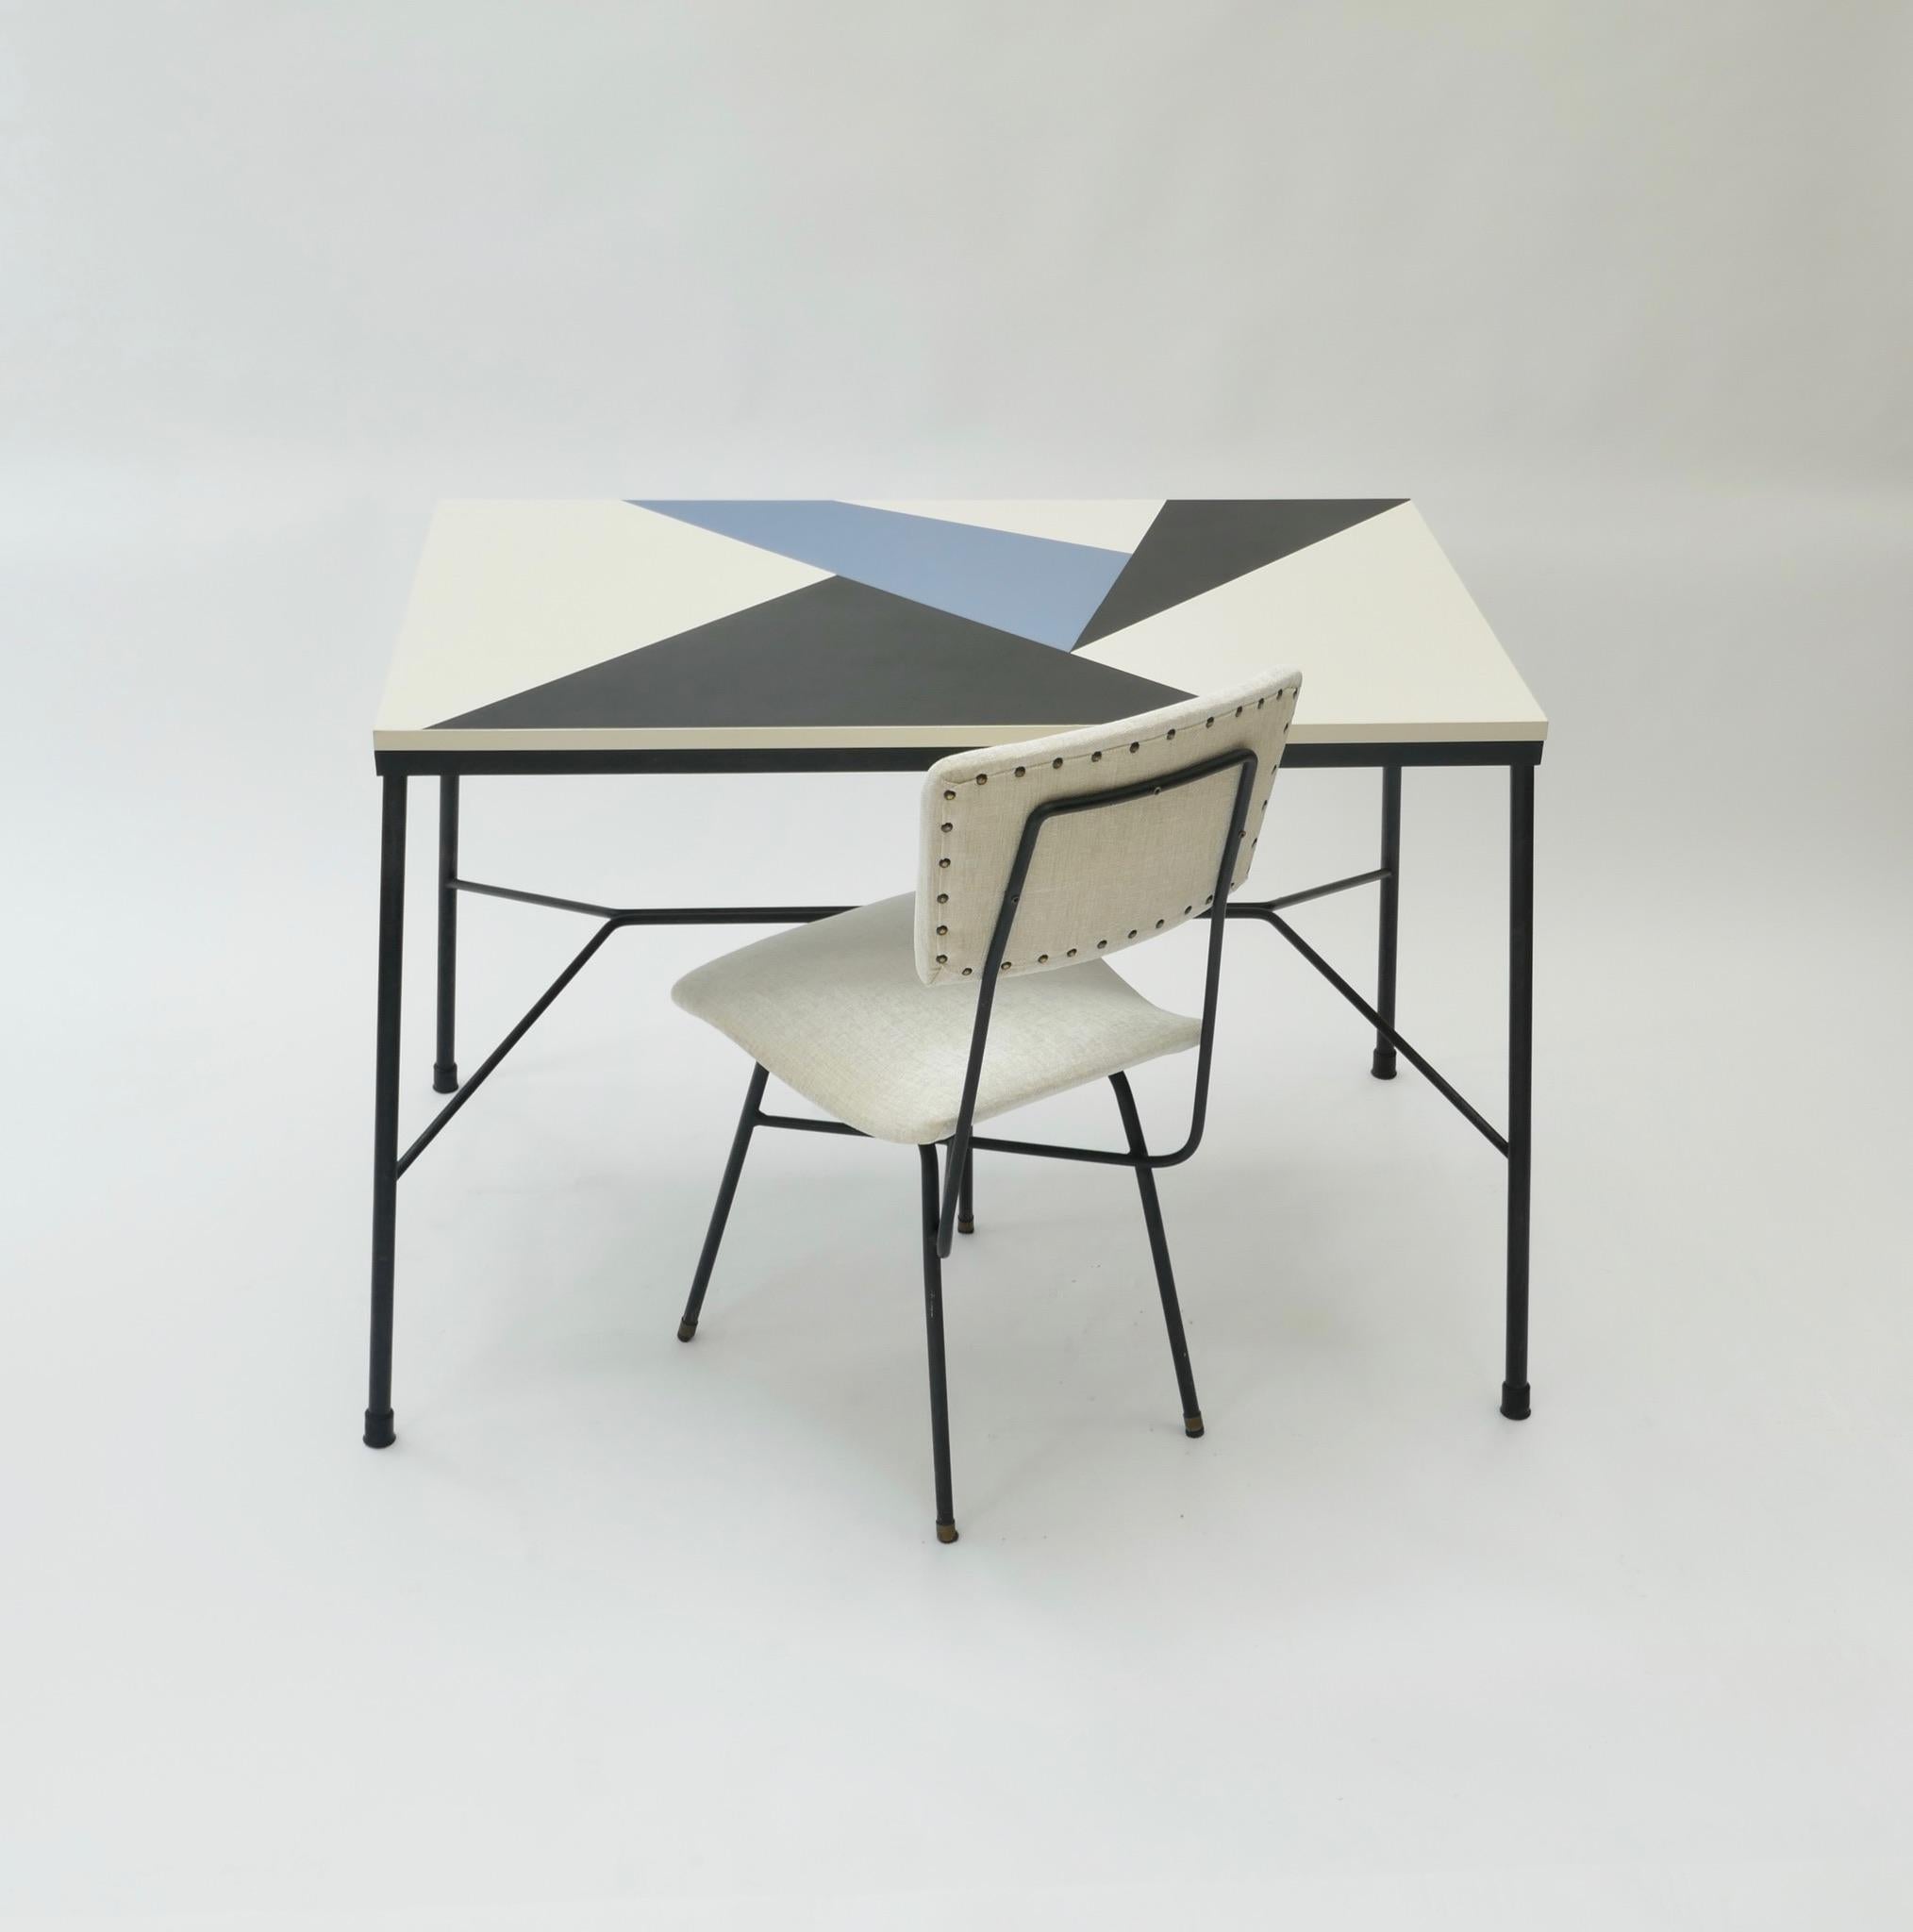 Midcentury desk with a black, white and blue melamine wood top and a white velvet chair with a black metal structure.